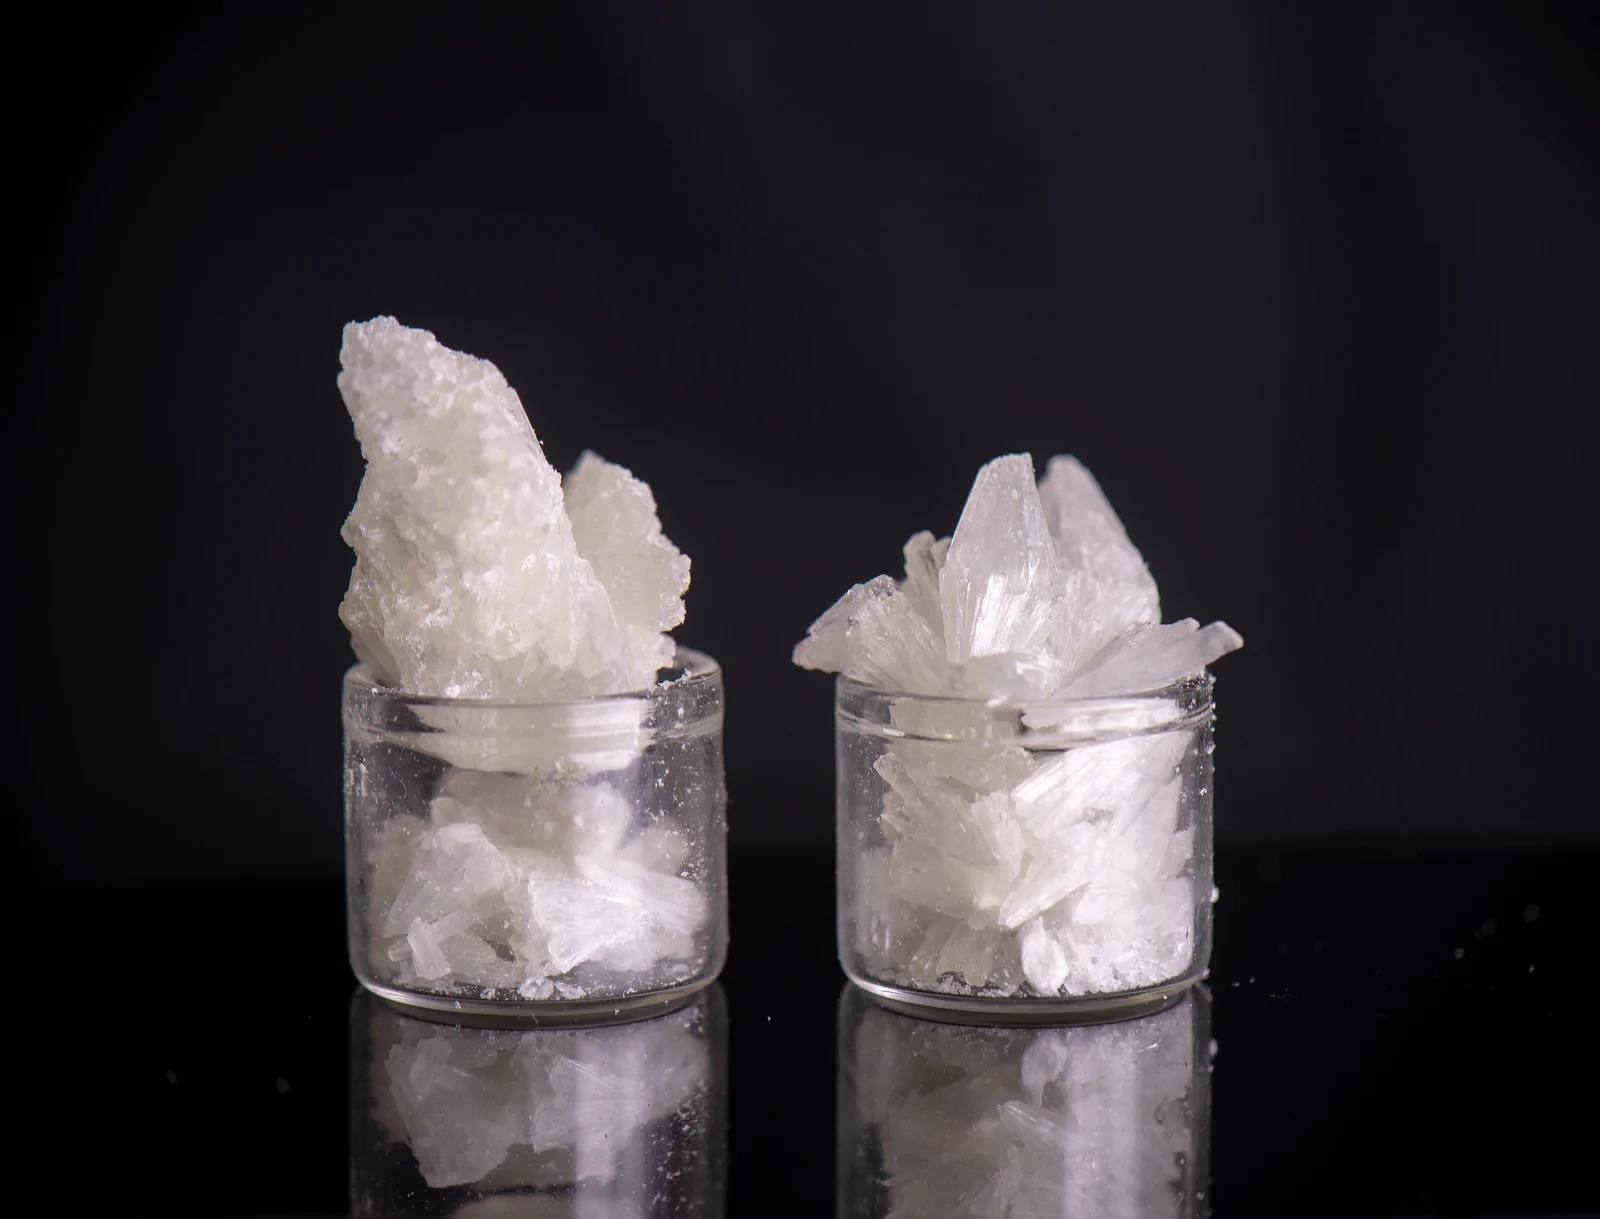 CBD Crystalline Isolate - How To Use In 2023?